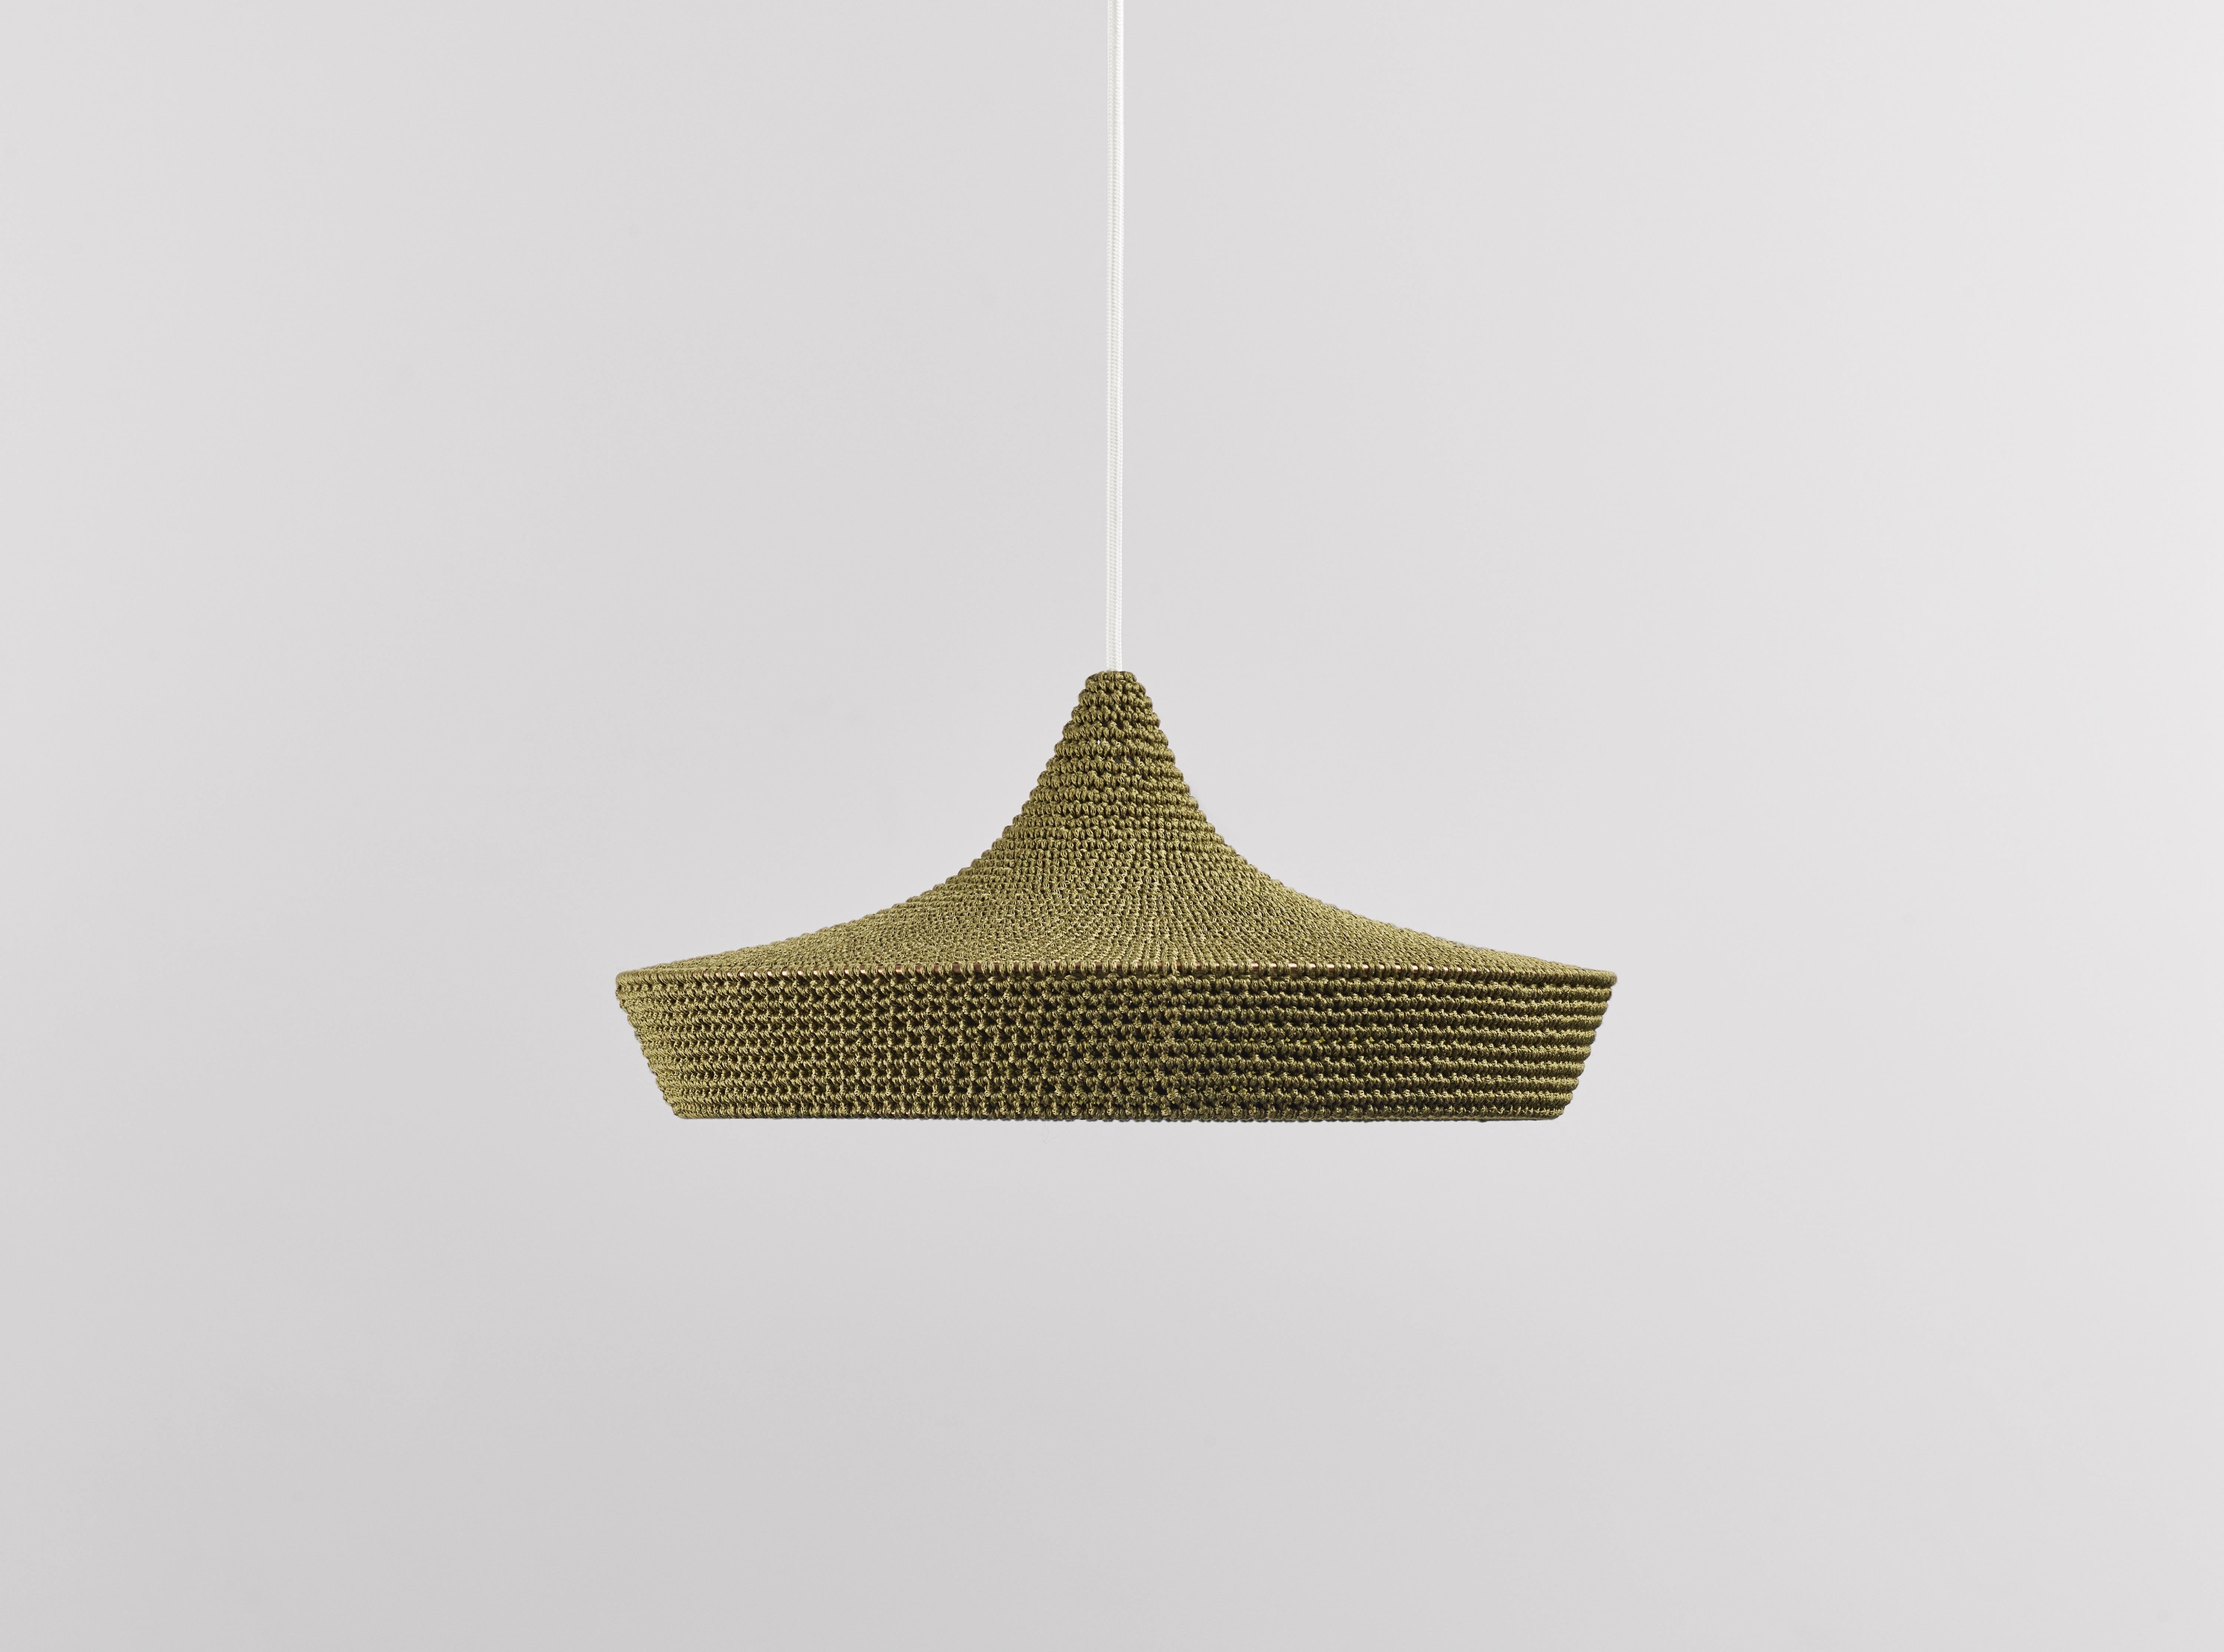 Medium cave pendant lamp by Naomi Paul
Dimensions: D 50 x H 24 cm
Materials: Metal frame, Egyptian cotton cord.
Color: Olive and green gold inside edge.
Available in other colors and in 4 sizes: D30, D40, D50, D60 cm.
Available in Inside edge